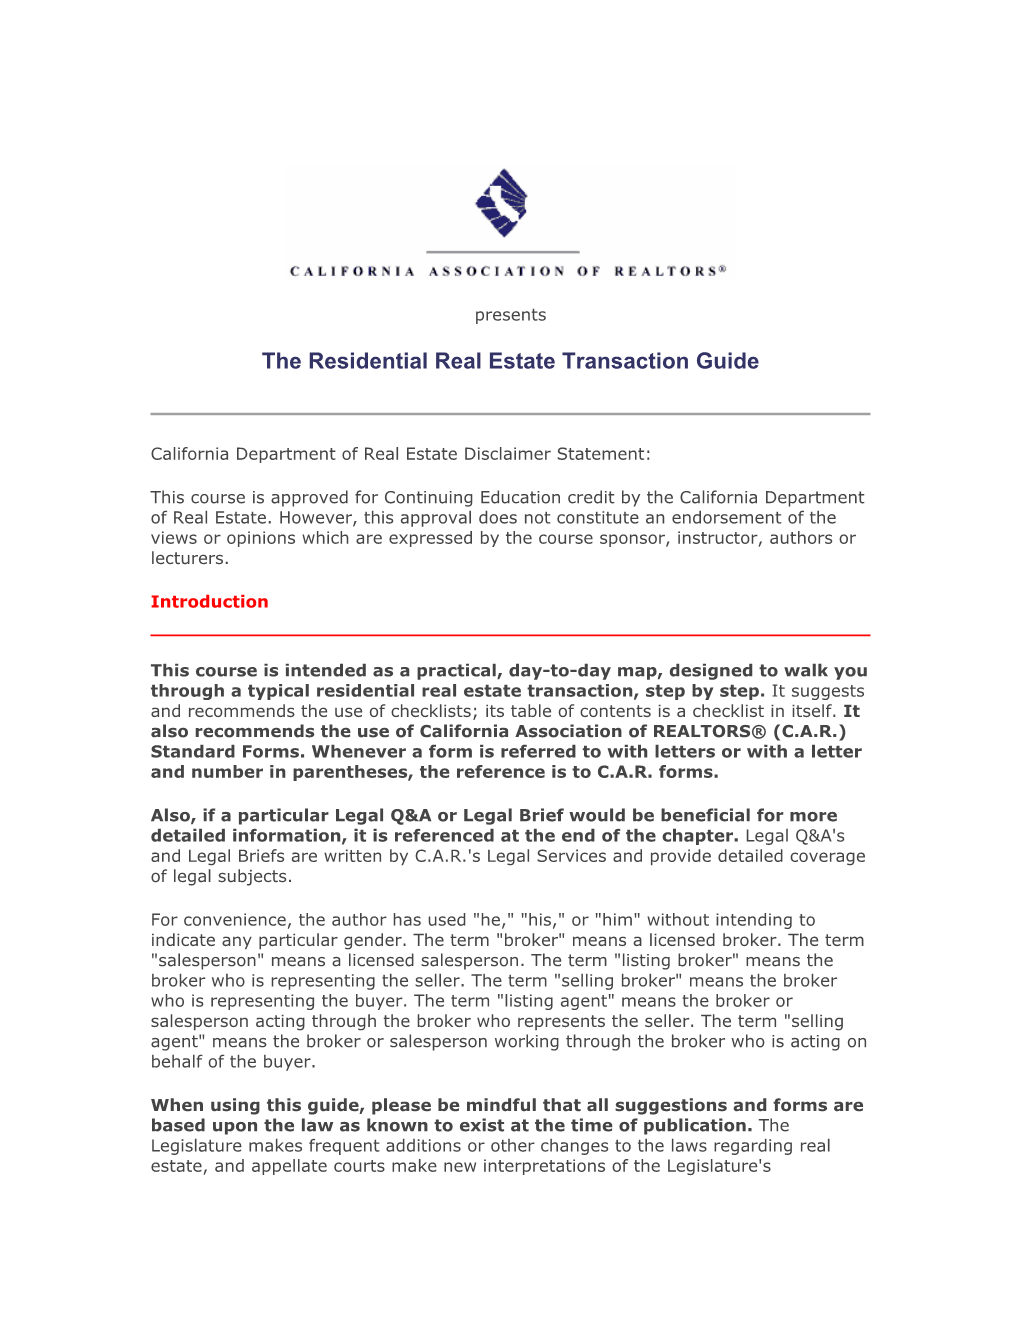 The Residential Real Estate Transaction Guide